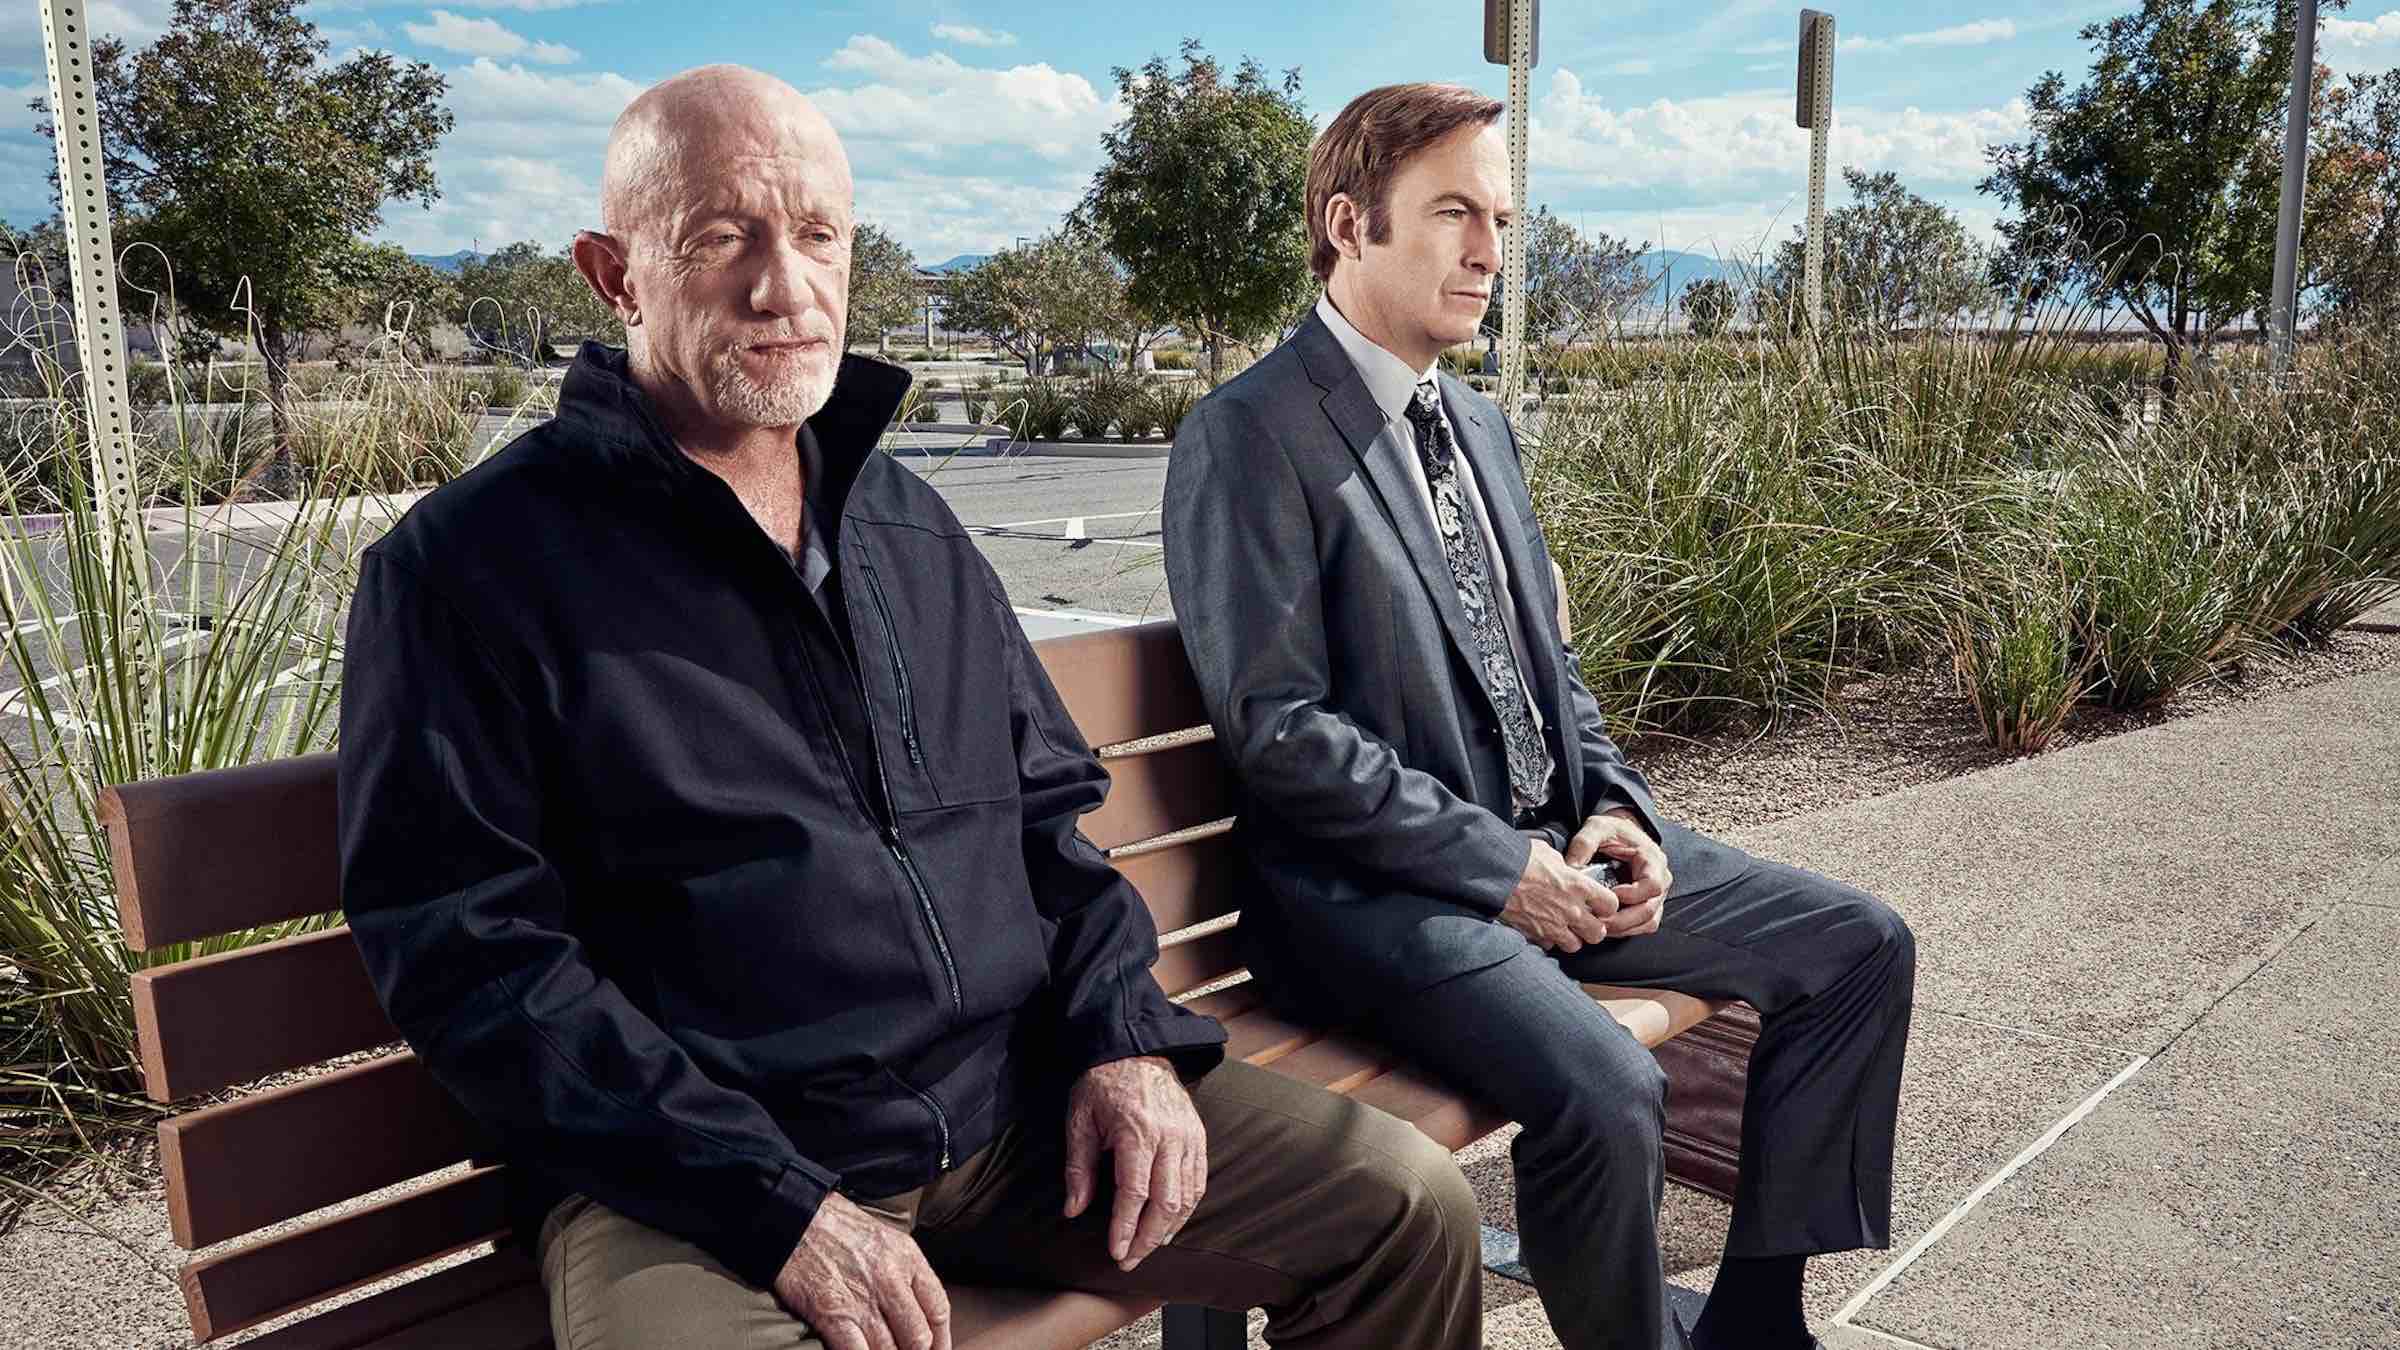 We have a premiere date for the fifth season of the 'Breaking Bad' prequel. 'Better Call Saul' is returning for S5 and here's what we know.